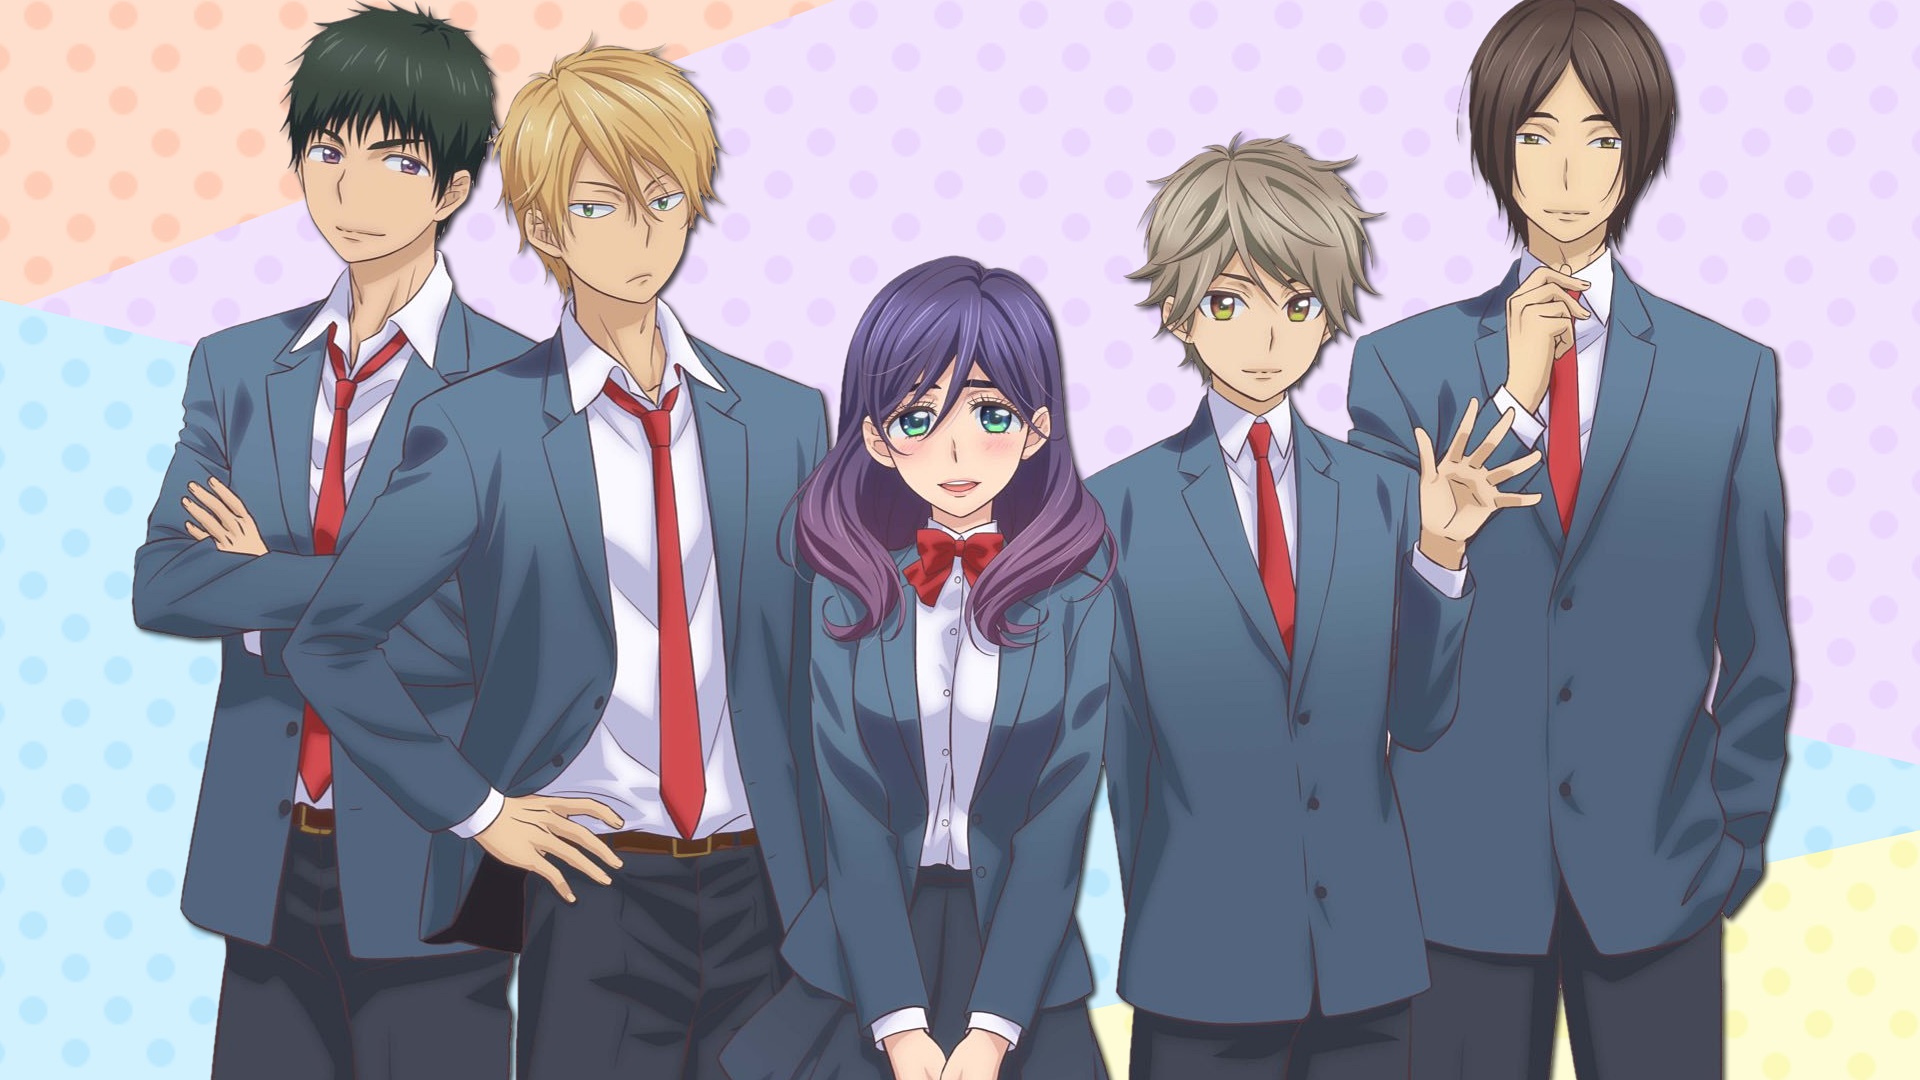 7 Attributes of a Successful Reverse Harem Protagonist: A Look at